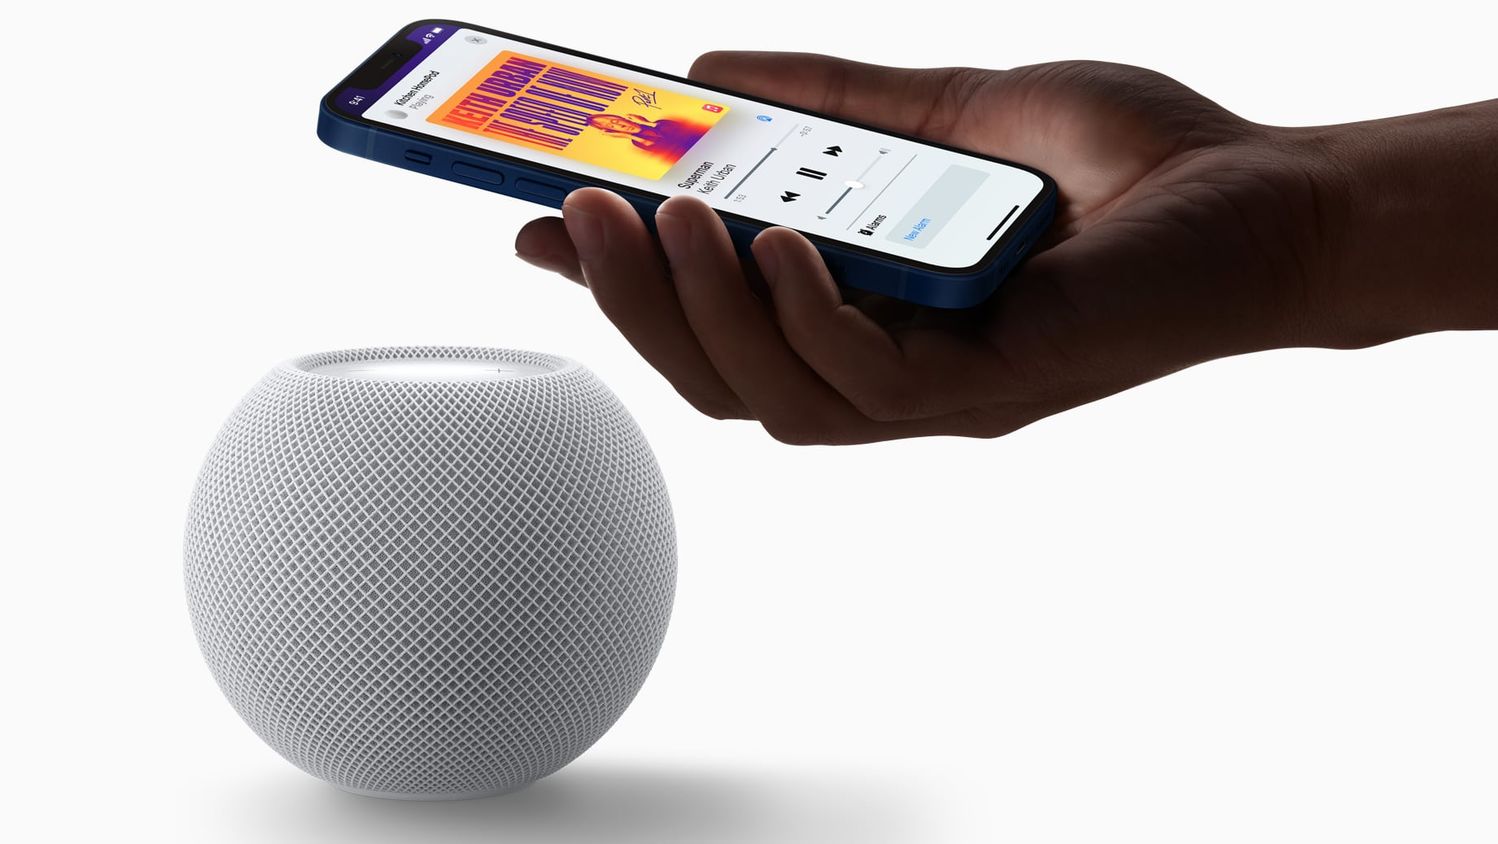 First look: Apple's iPhone 12 line-up, HomePod Mini - Executive Traveller